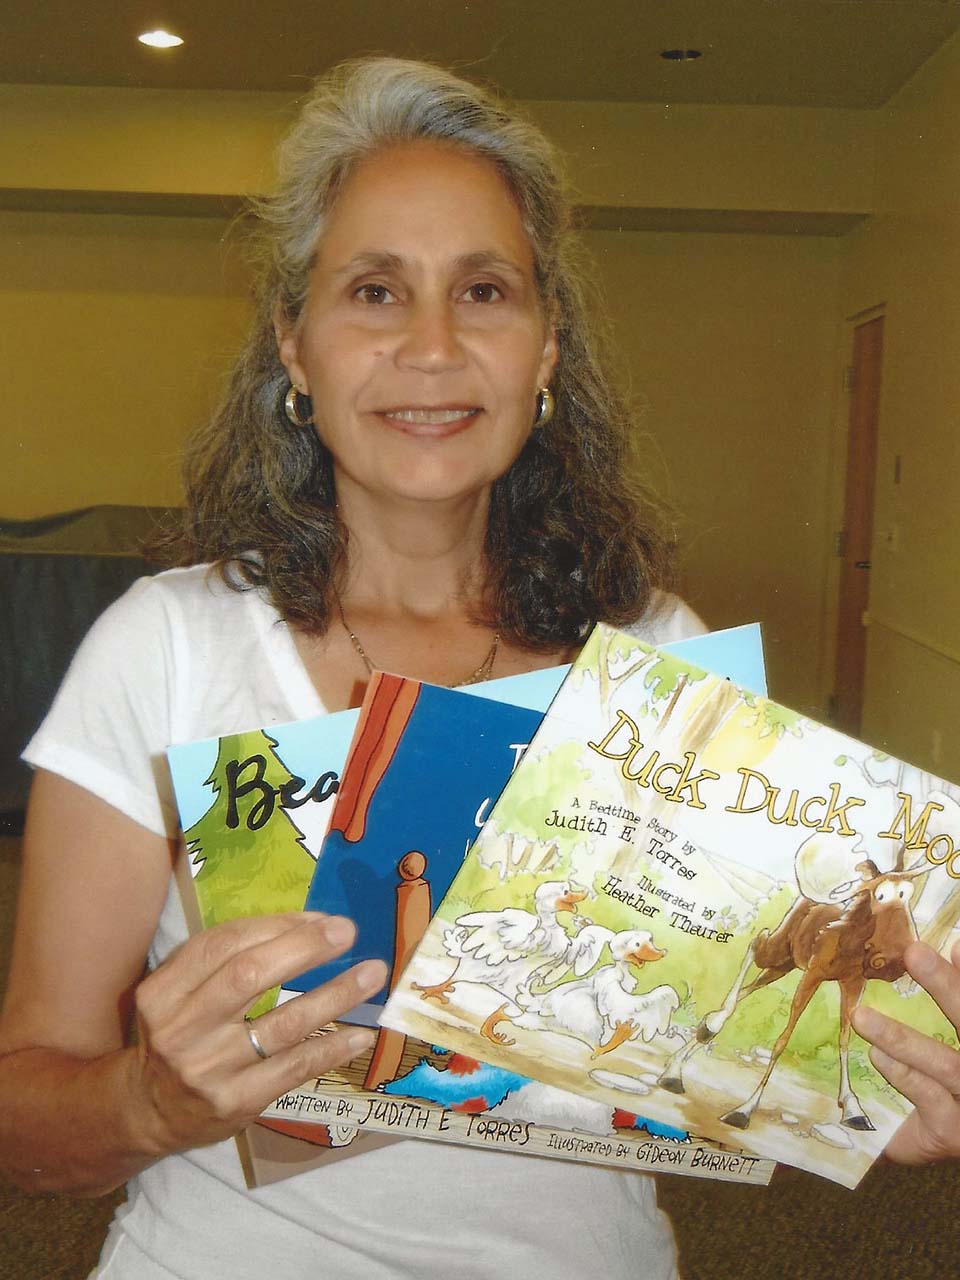 Judith with her books